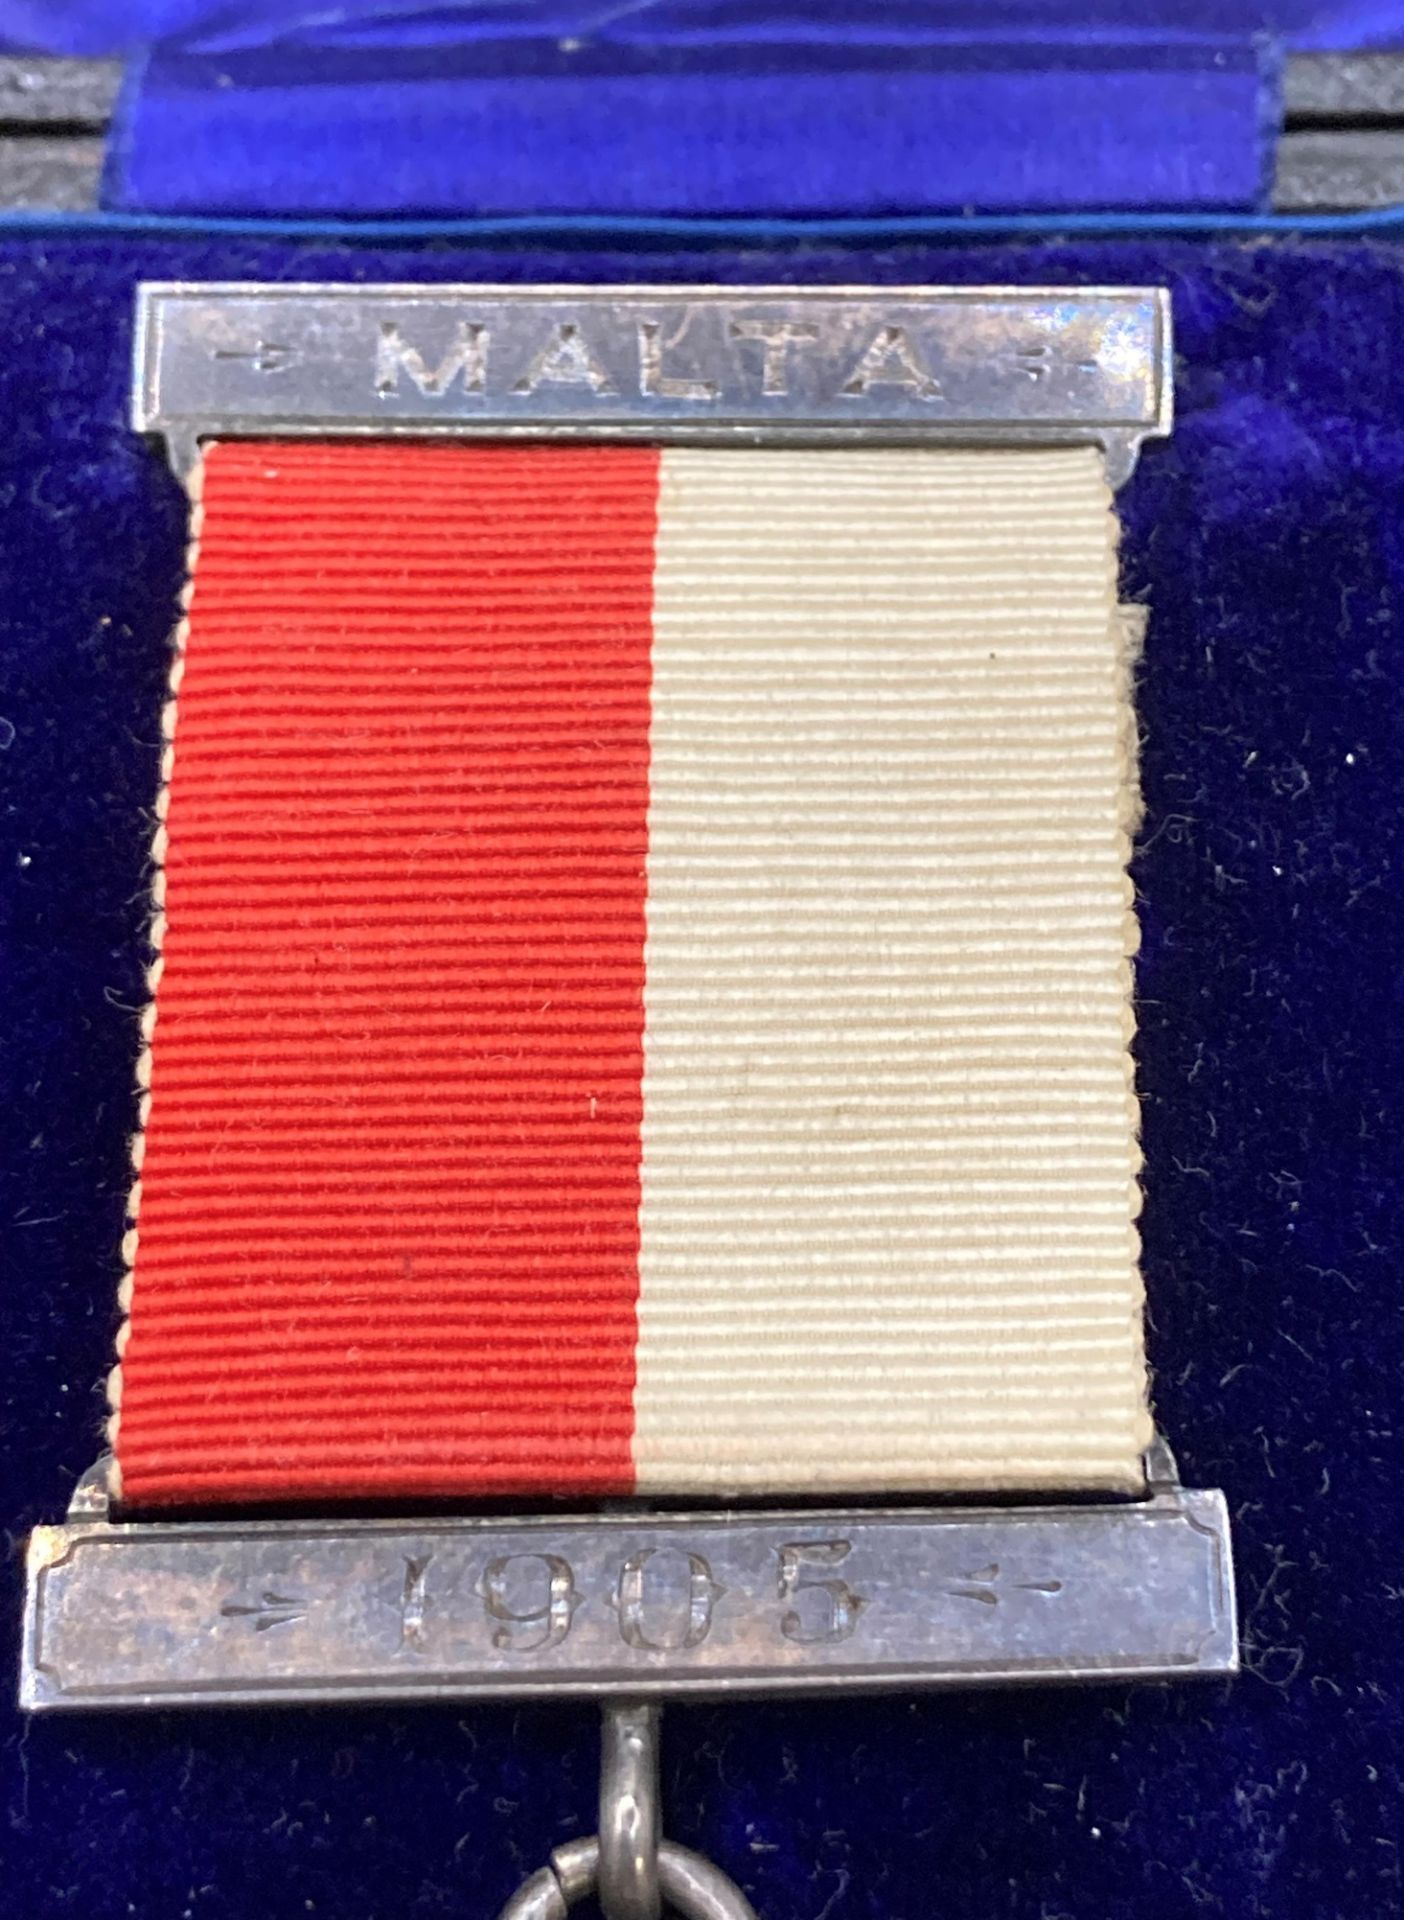 UNITED SERVICE CUP SPORTS MEDAL MALTA 1905 in silver awarded to ED. J. COOPER. P.O. 1ST. CLASS. H.M. - Image 3 of 4